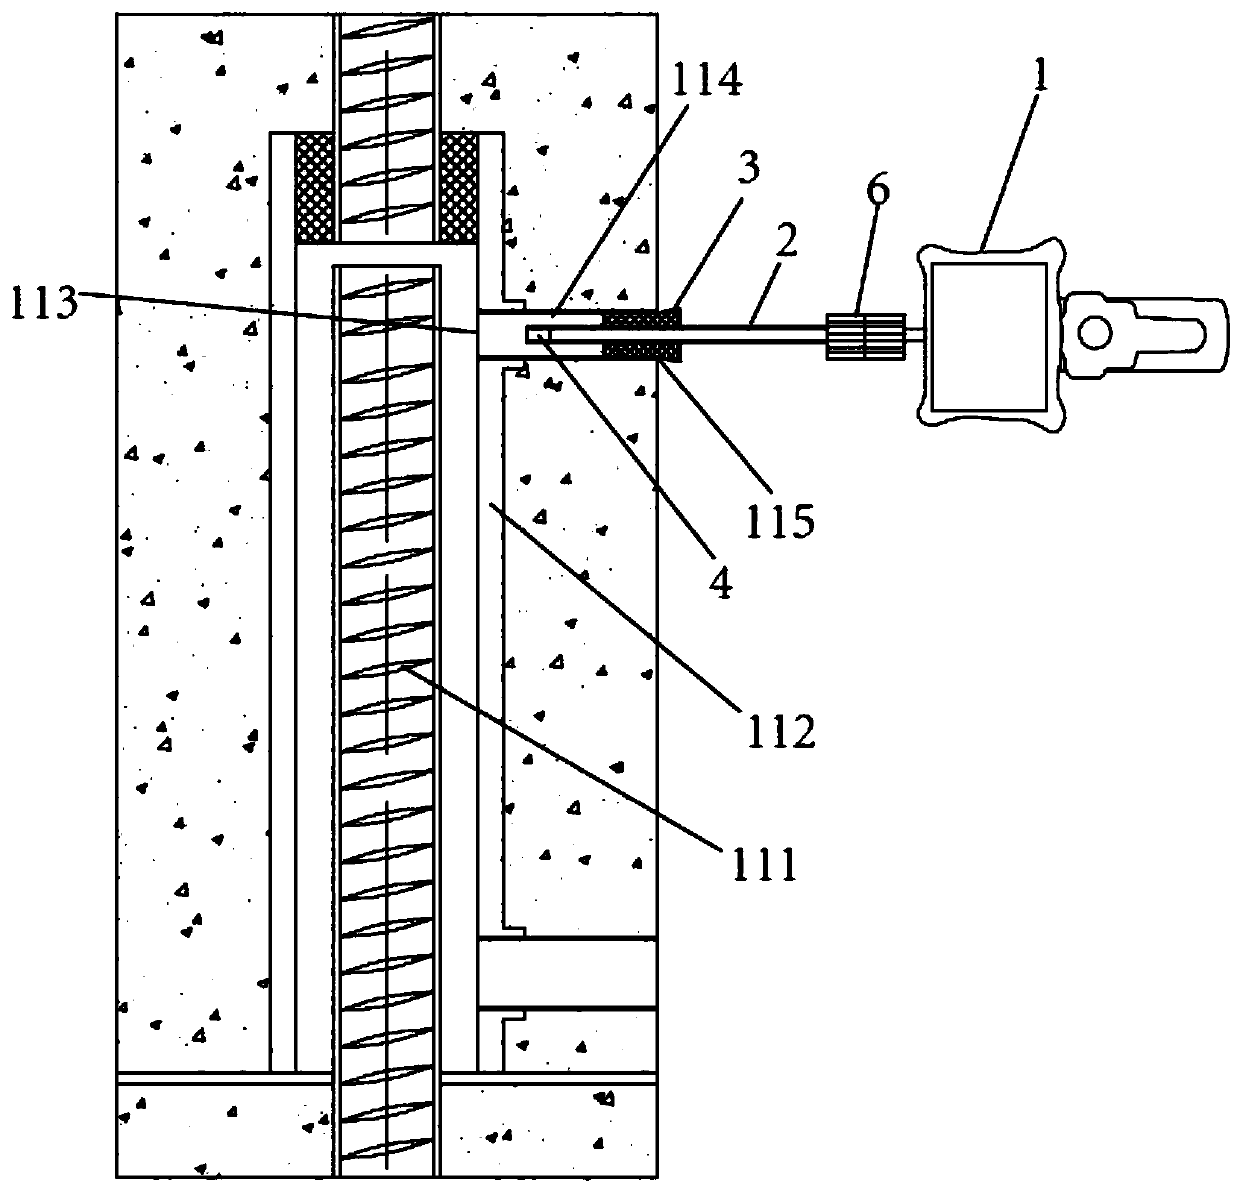 A method for detecting the insertion depth of connecting steel bars in half-grouting sleeve steel bar joints